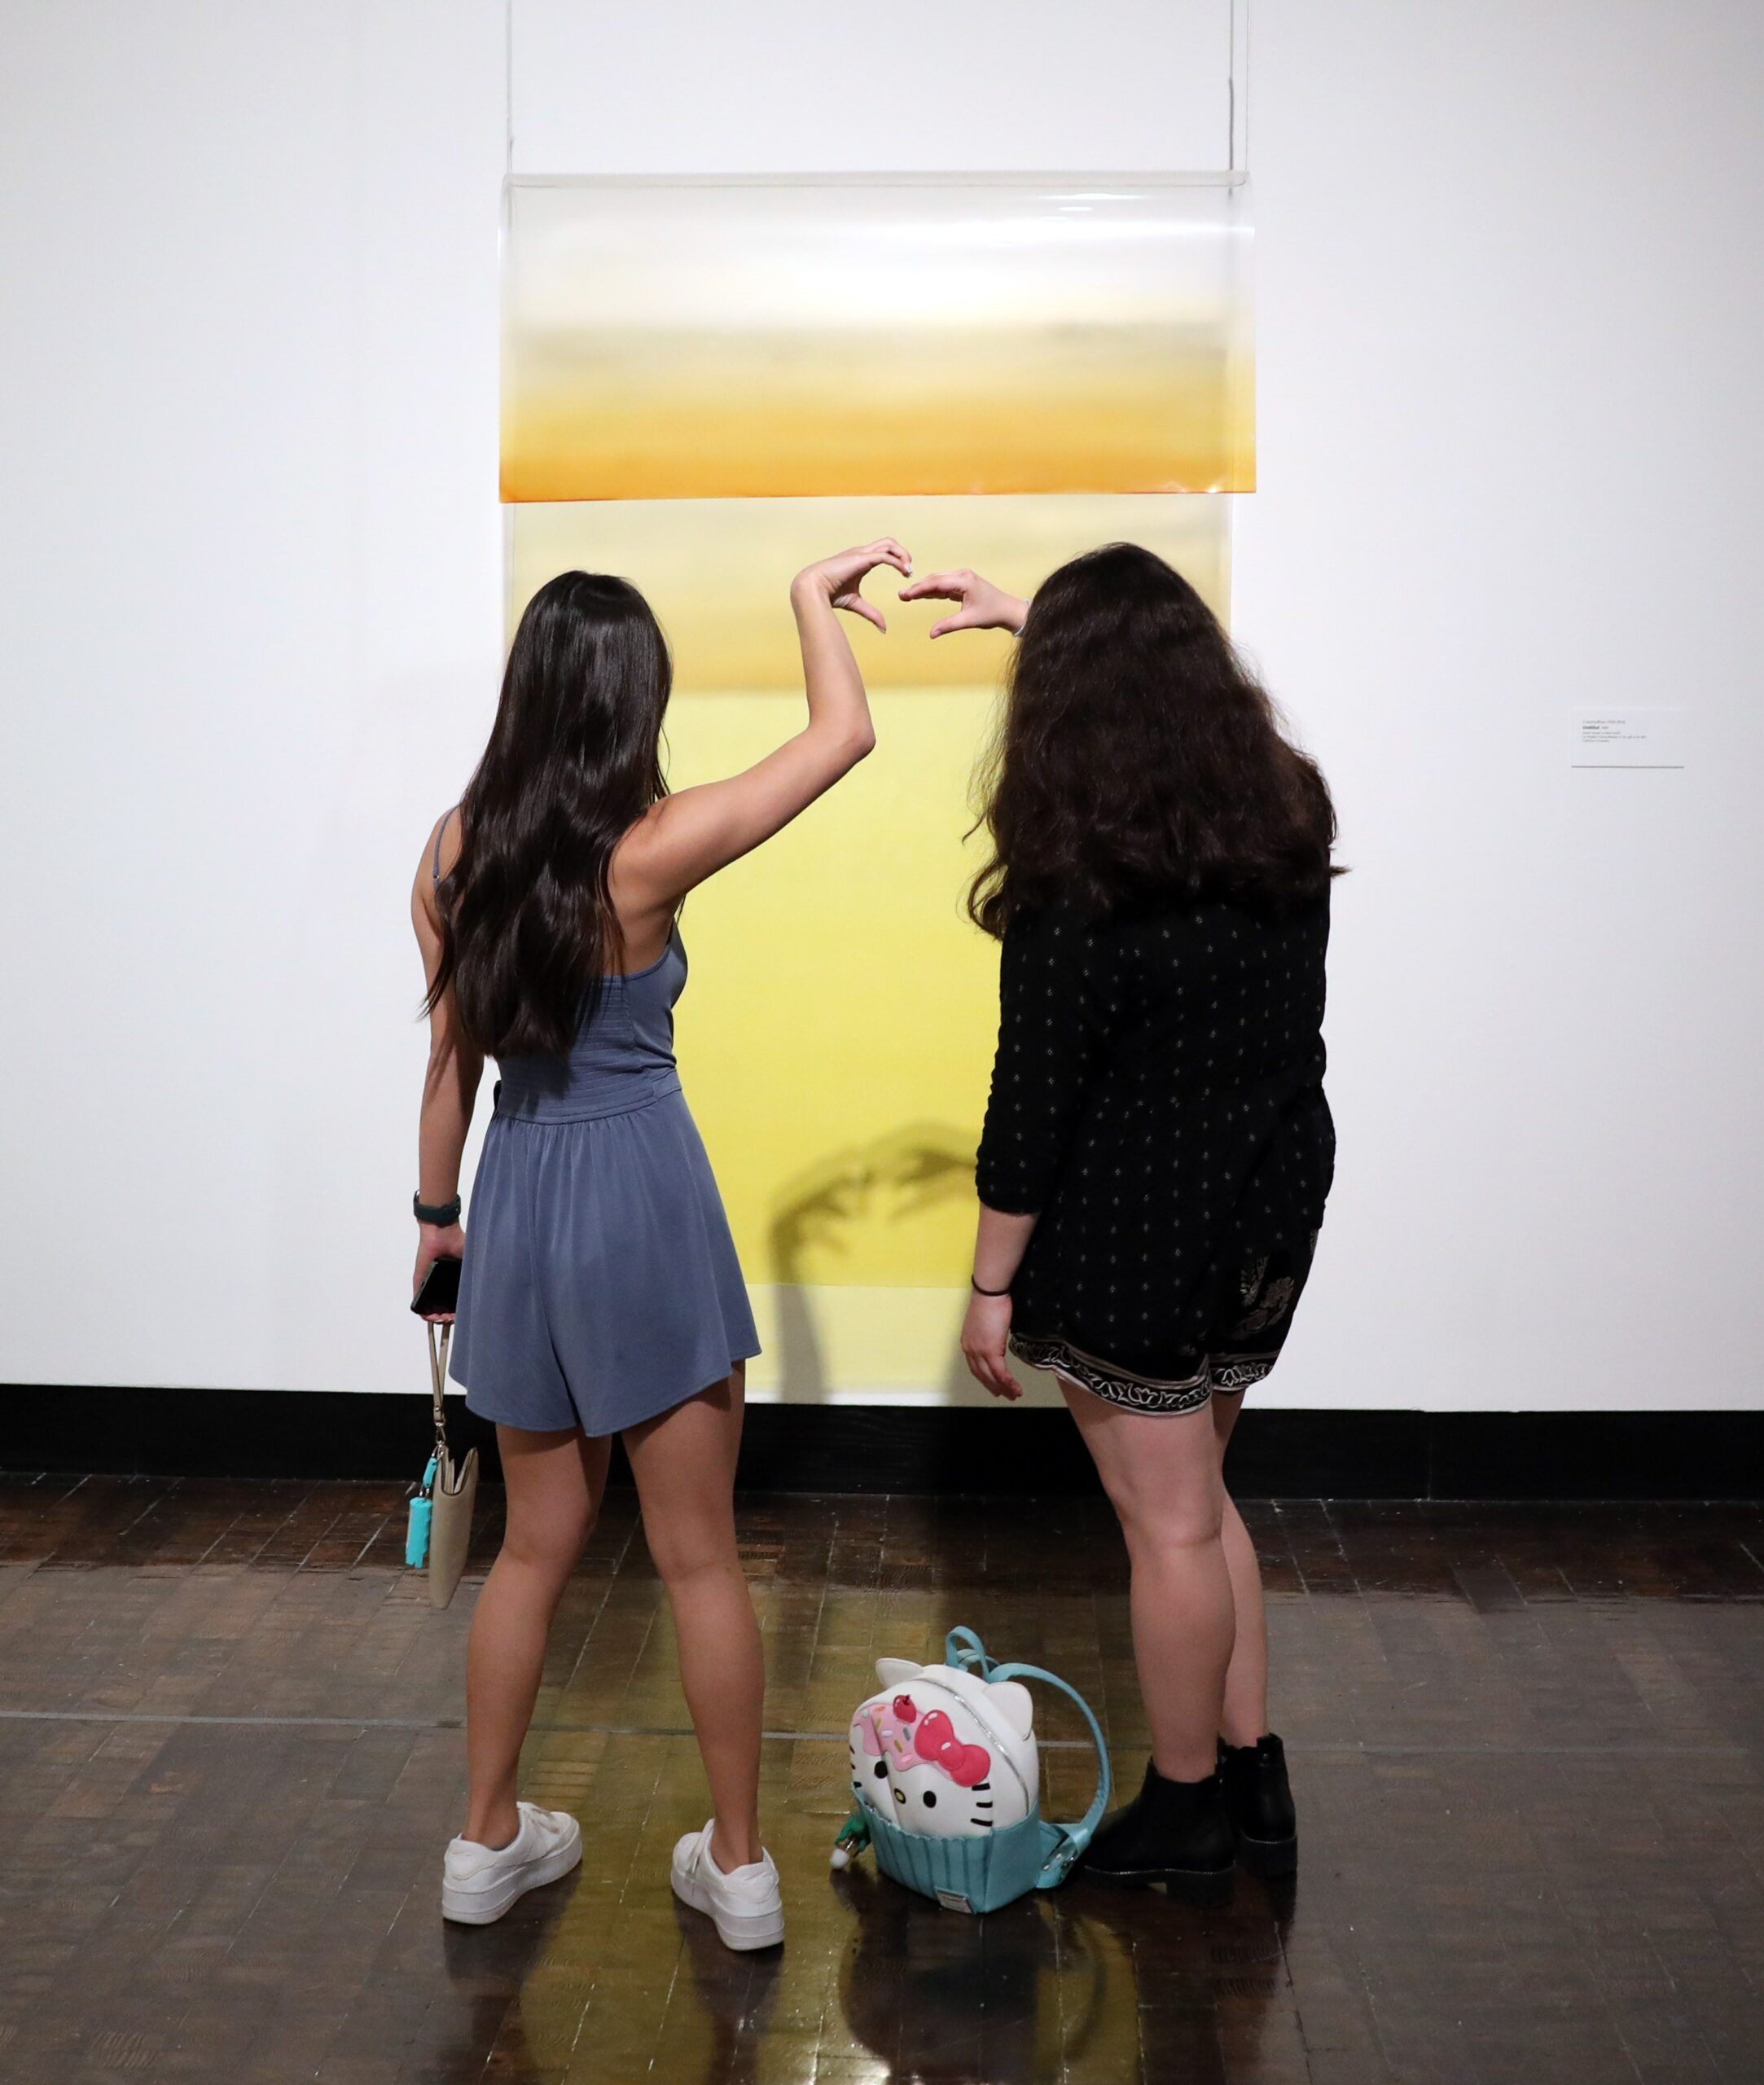 Two teens looking at a bright yellow piece of art holding up the heart symbol with their hands.